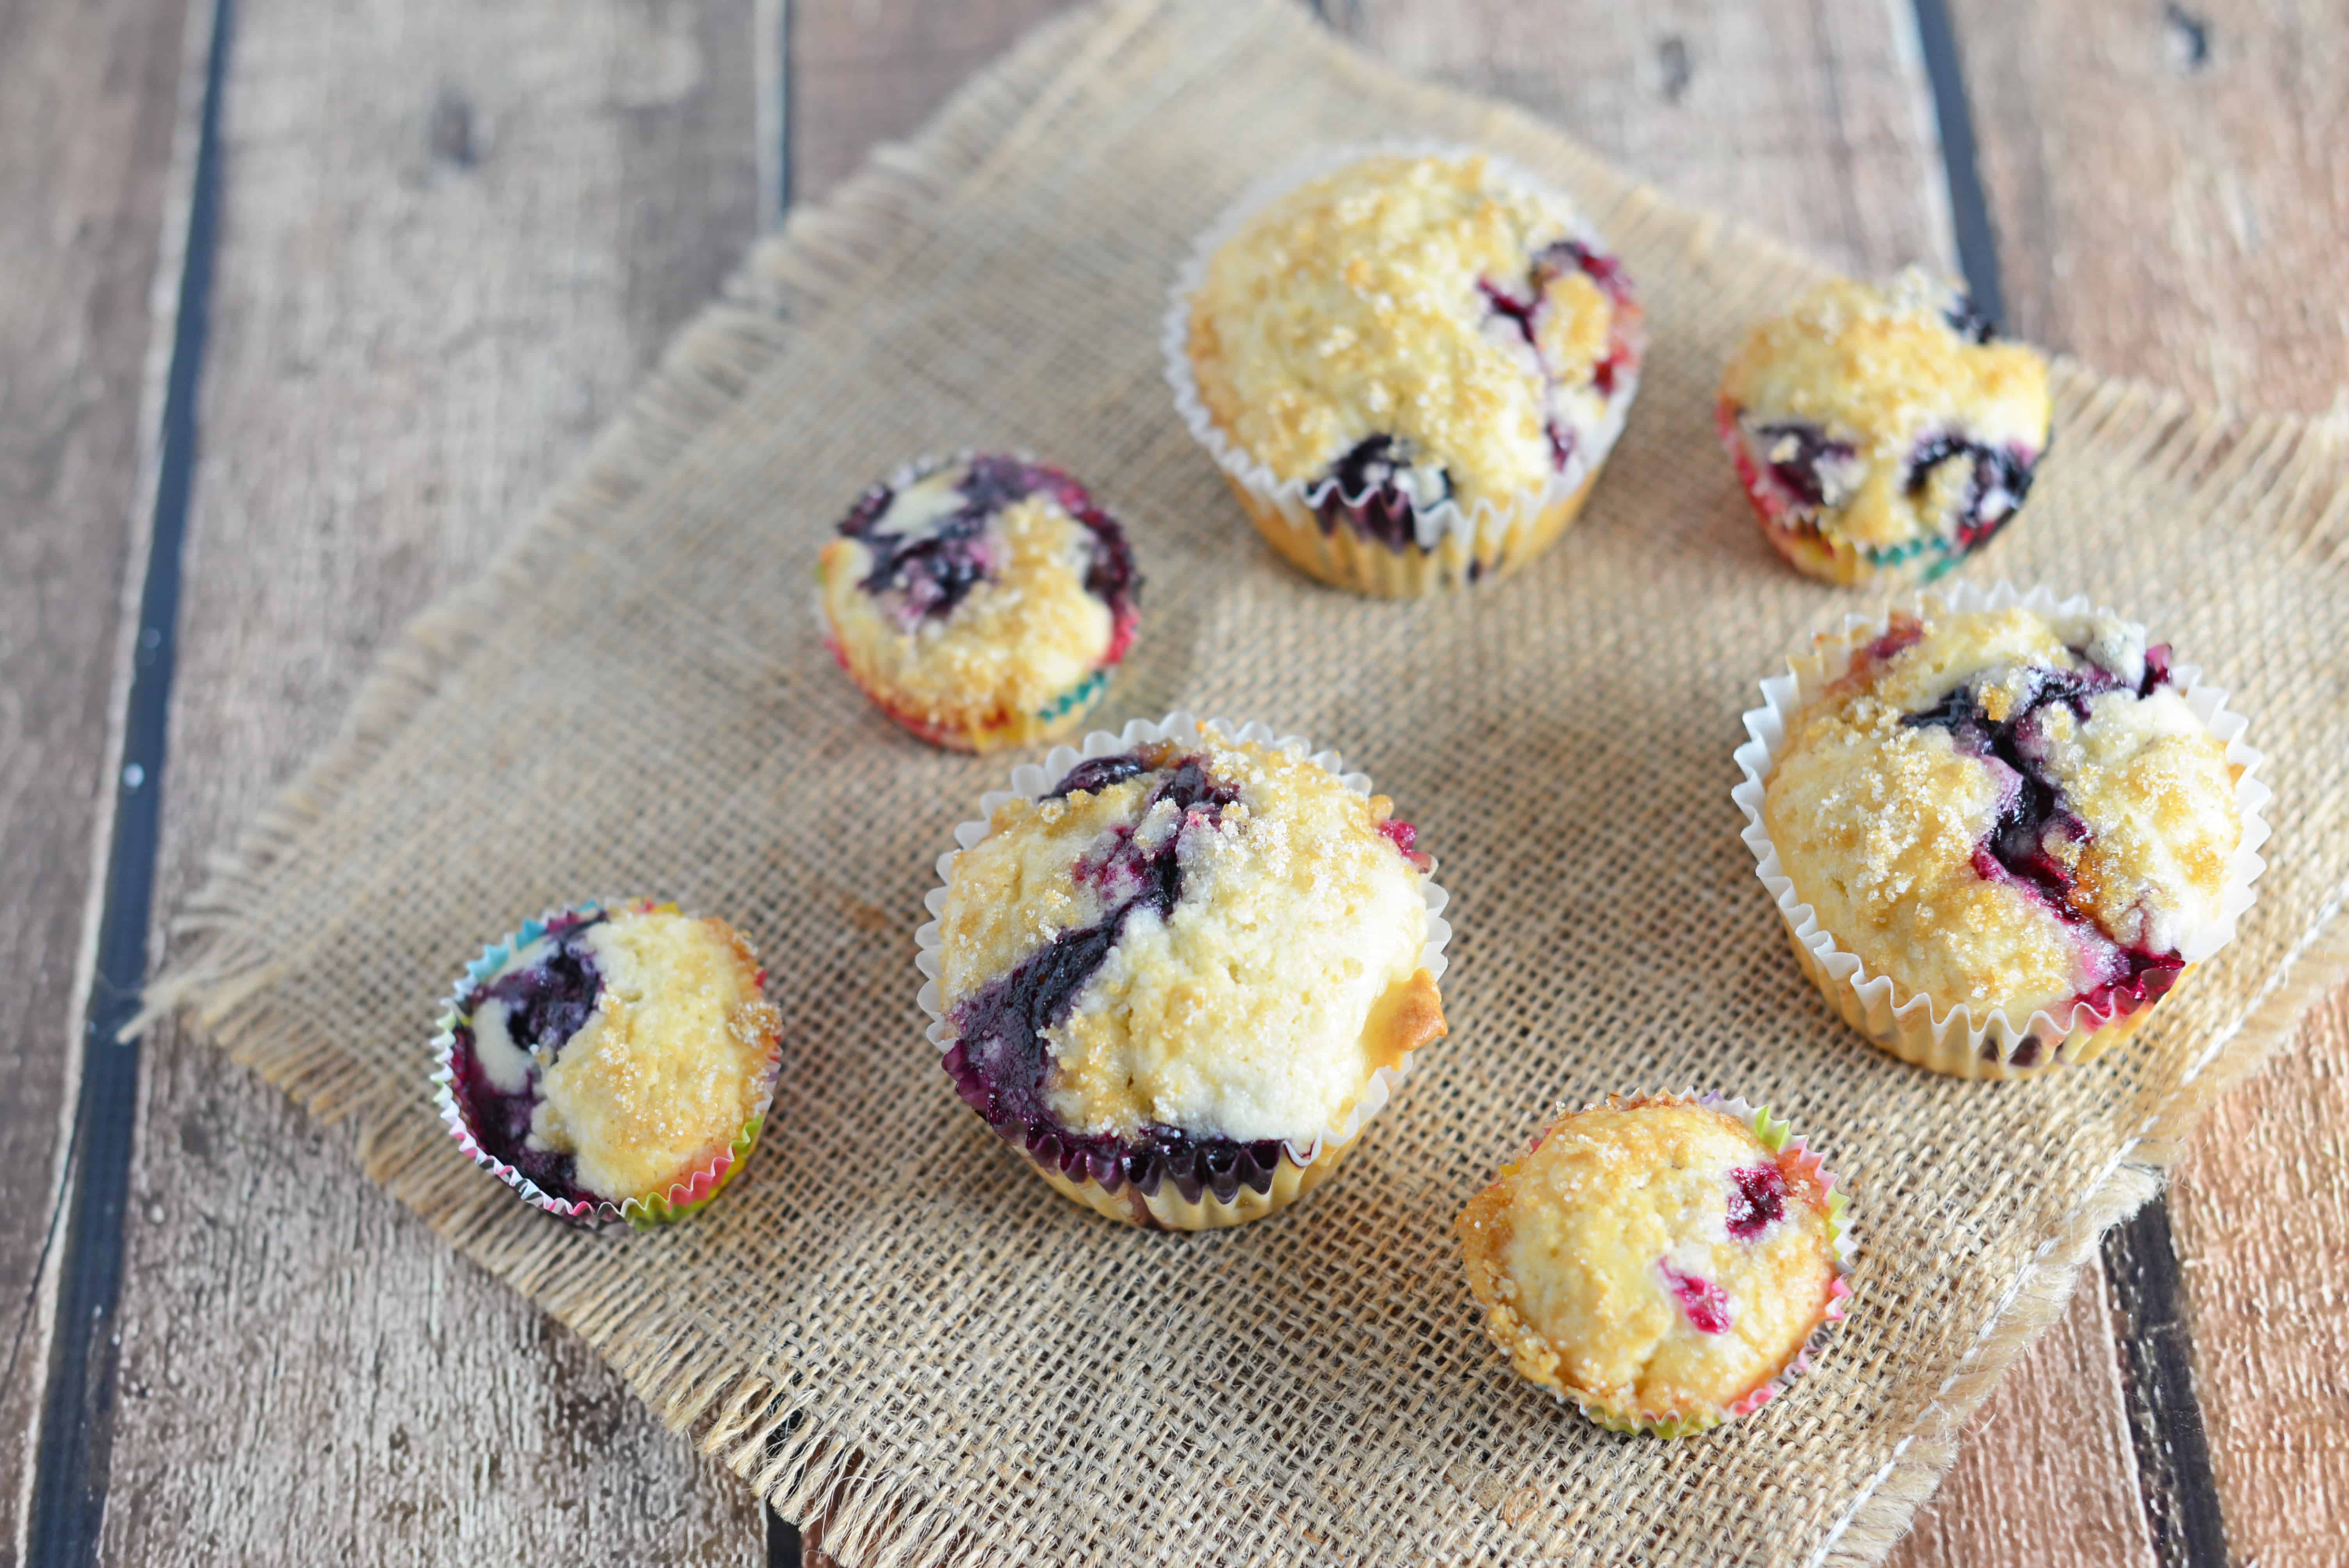 Classic Blueberry Muffins with a Streusel Crumble Topping - super easy recipe for super soft muffins. Perfect for any breakfast or brunch. www.savoryexperiments.com